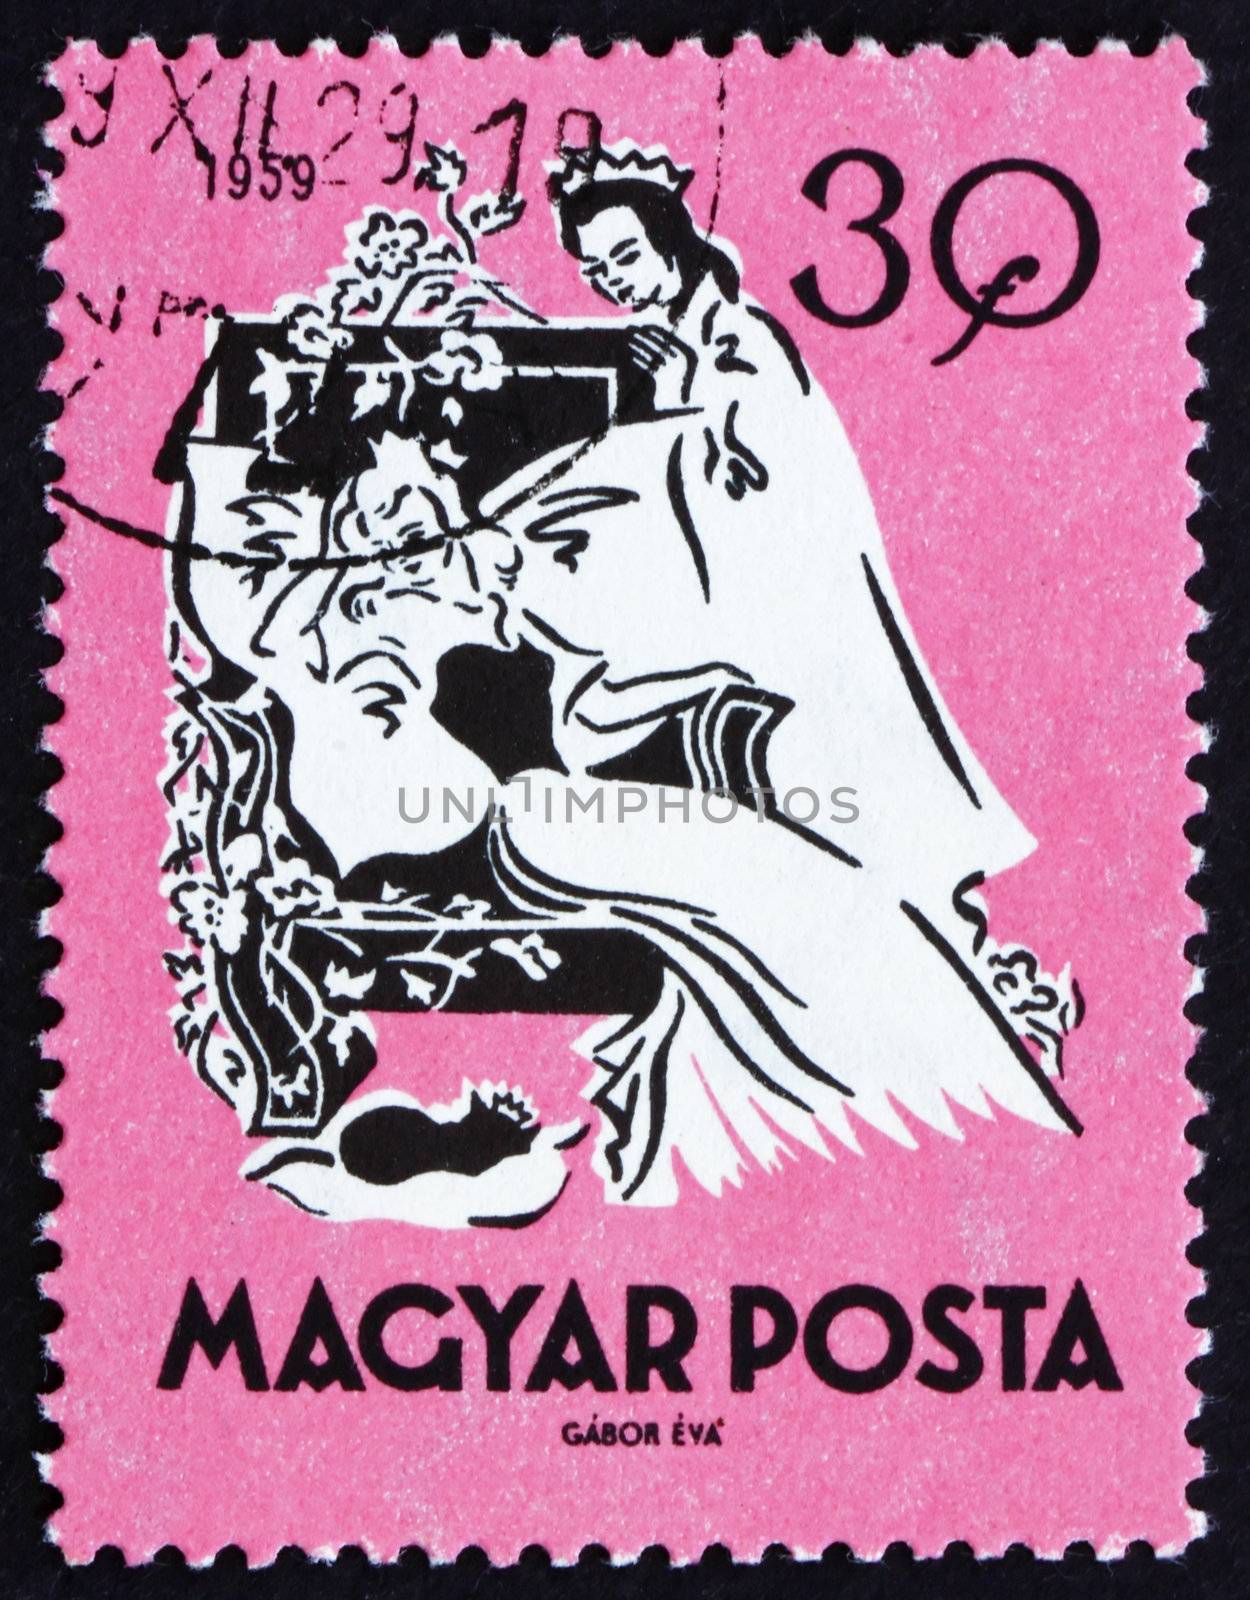 HUNGARY - CIRCA 1959: a stamp printed in the Hungary shows Sleeping Beauty, Fairy Tale, circa 1959